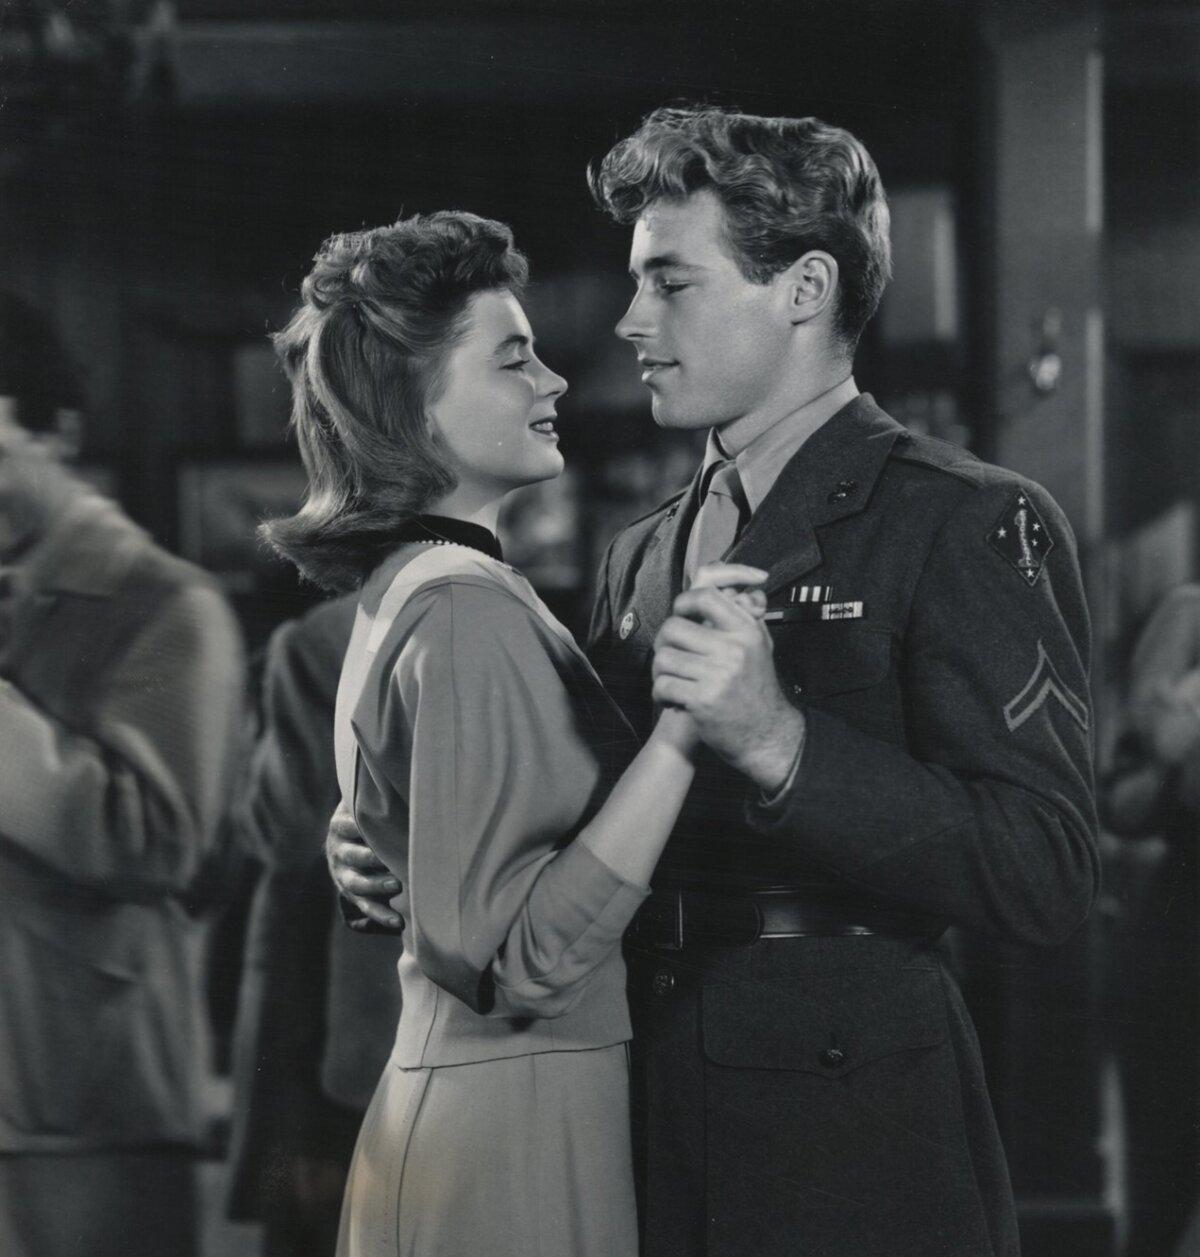 Patricia Ruscomb (Dorothy McGuire) and Cliff Harper (Guy Madison), in "Till the End of Time." (RKO Radio Pictures)